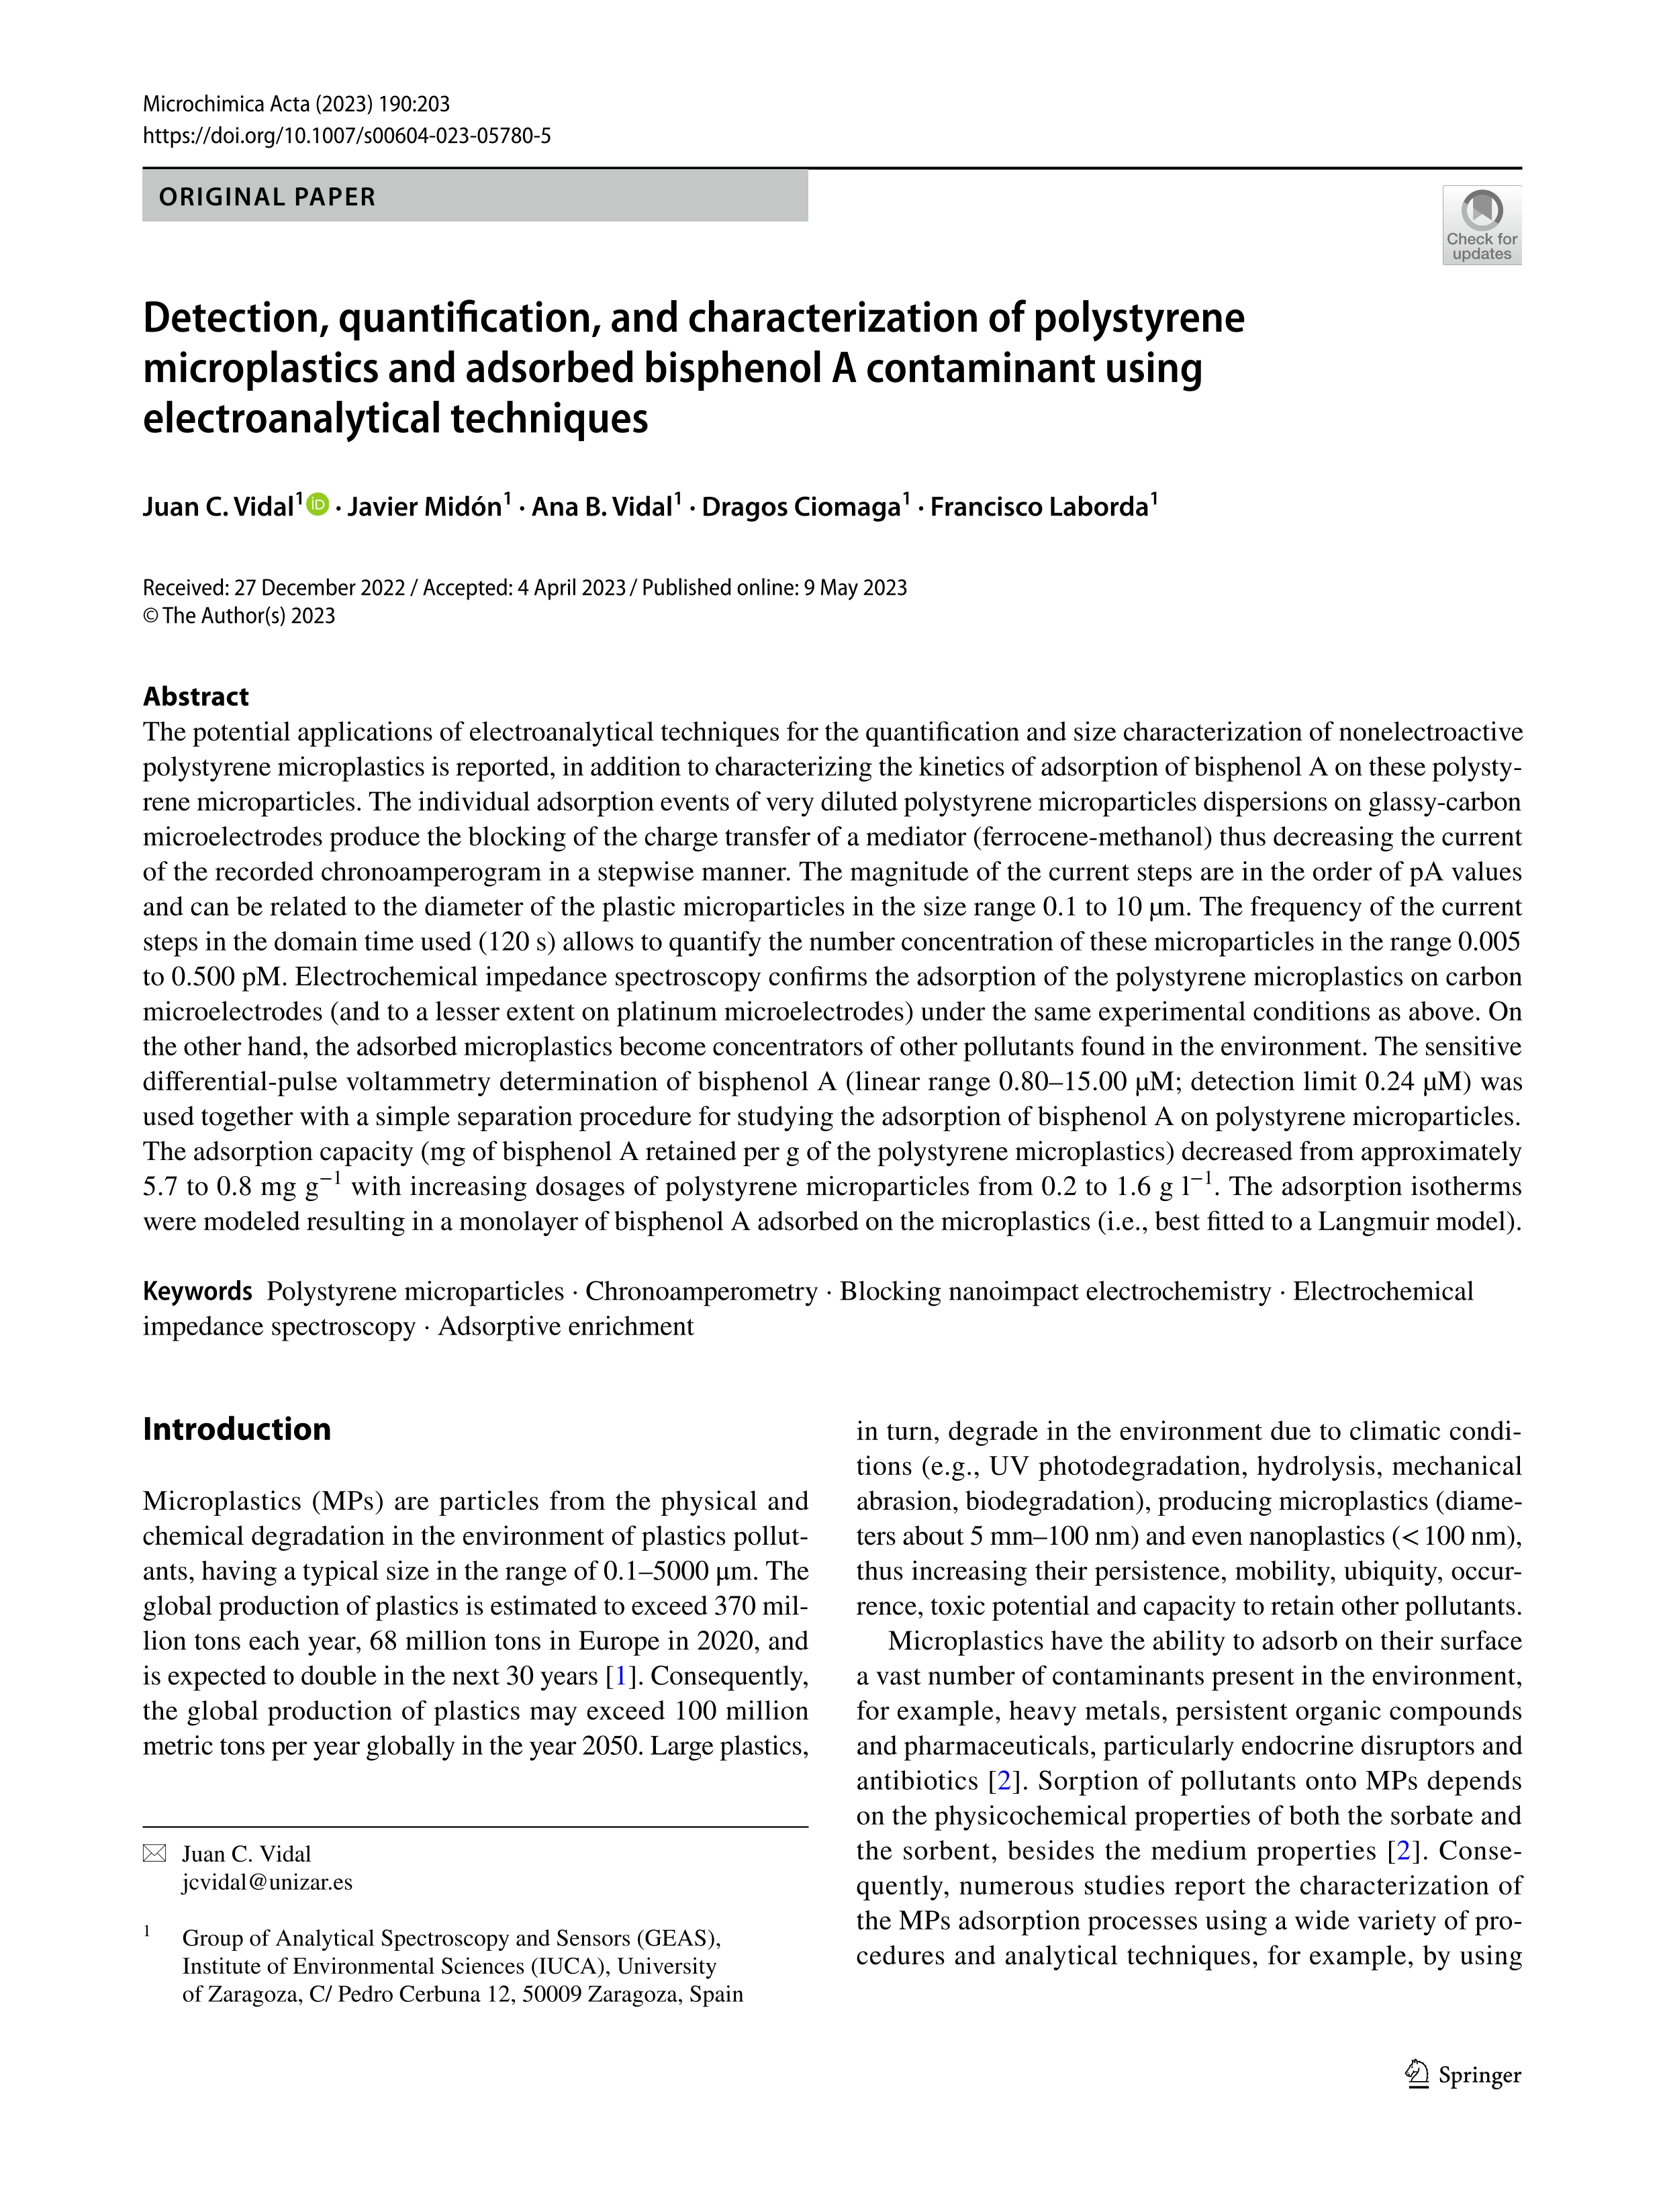 Detection, quantification, and characterization of polystyrene microplastics and adsorbed bisphenol A contaminant using electroanalytical techniques